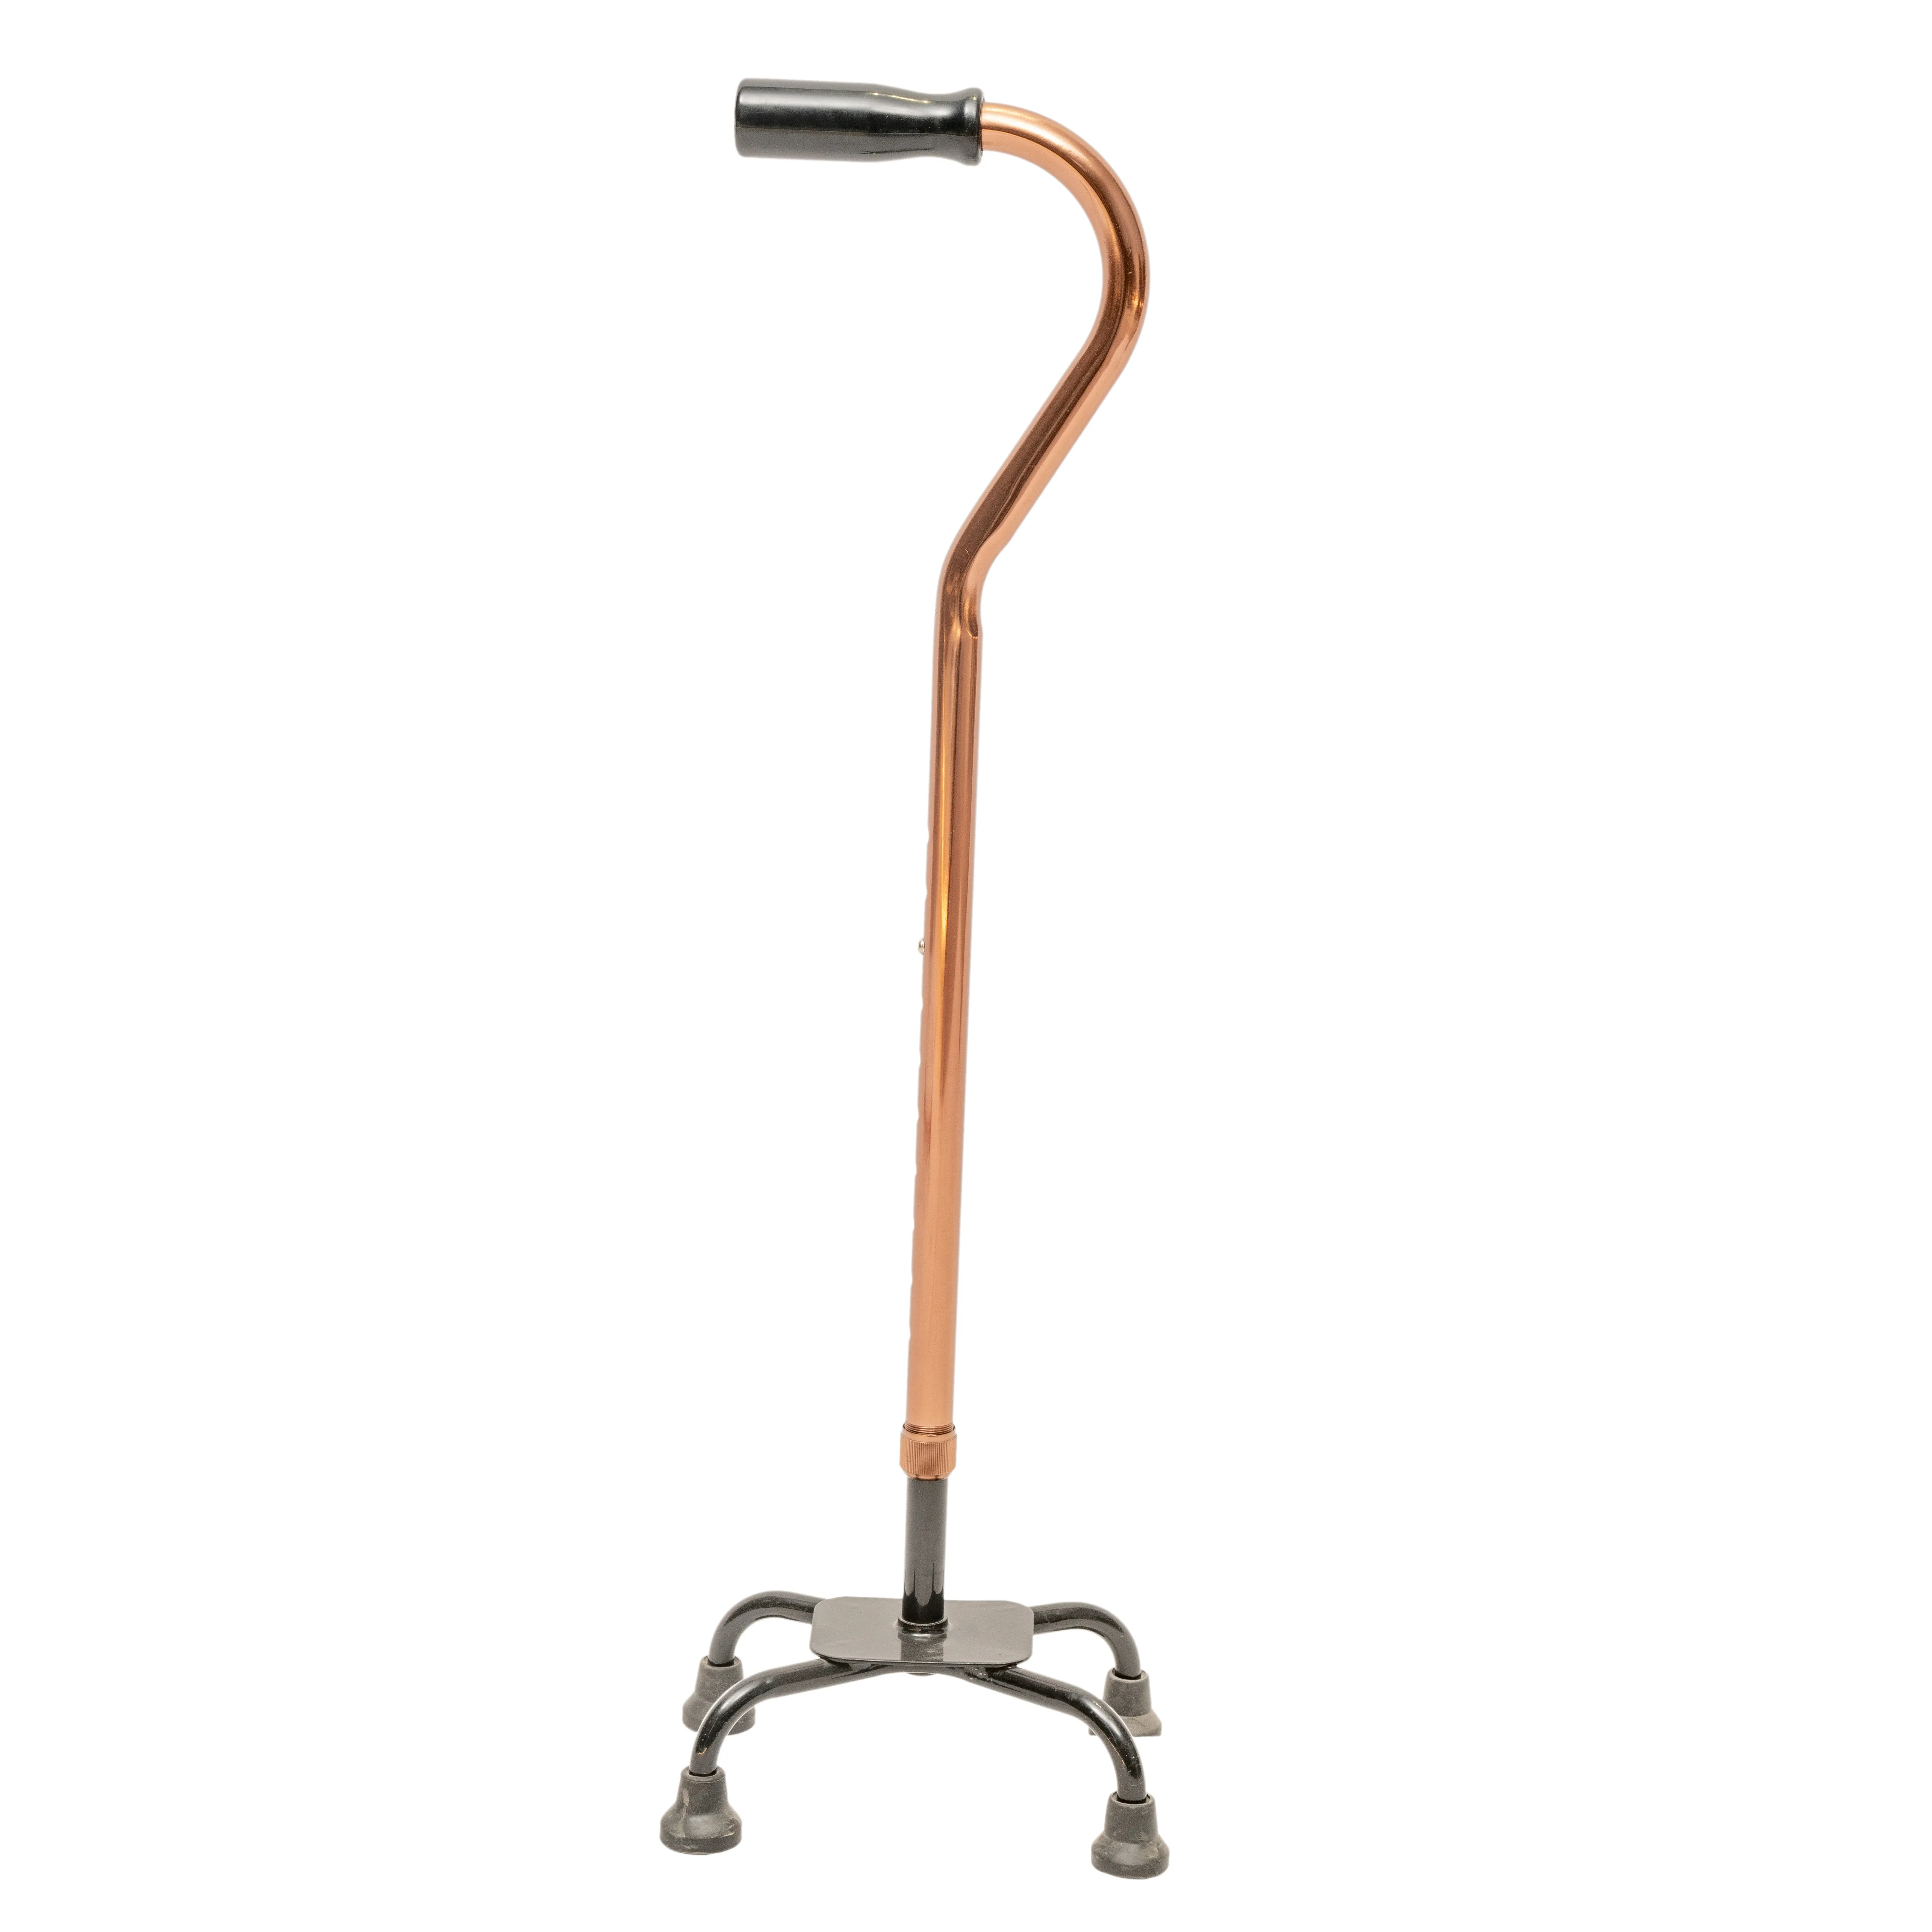 Factory supply four foot manual crutches second hand walking sticks cane folding crutches